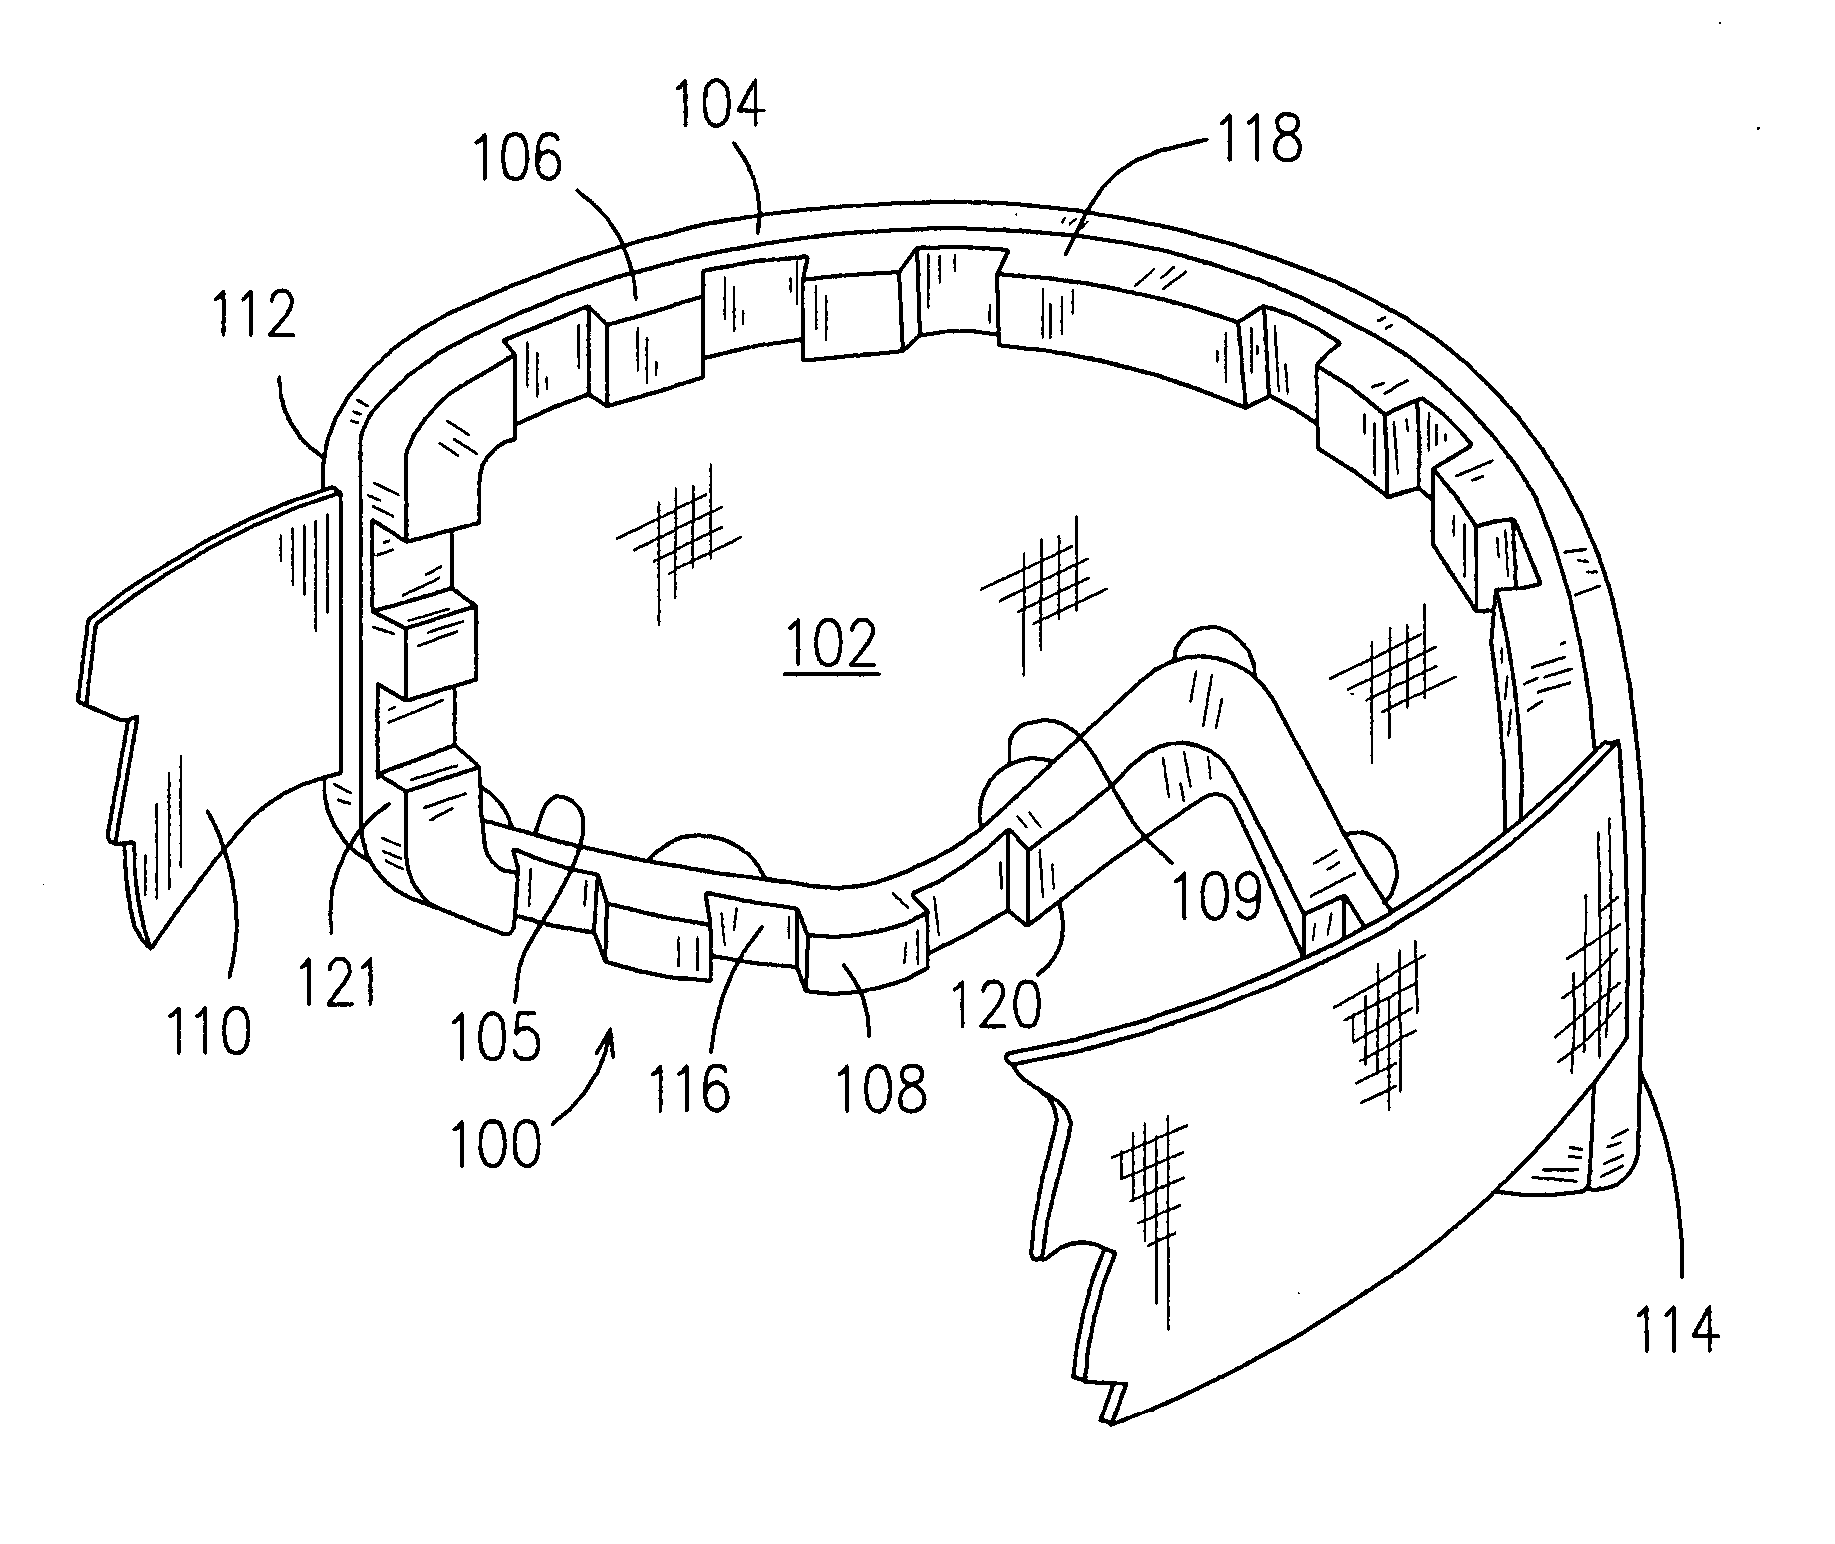 Lens attachment combined with formation of goggles frame